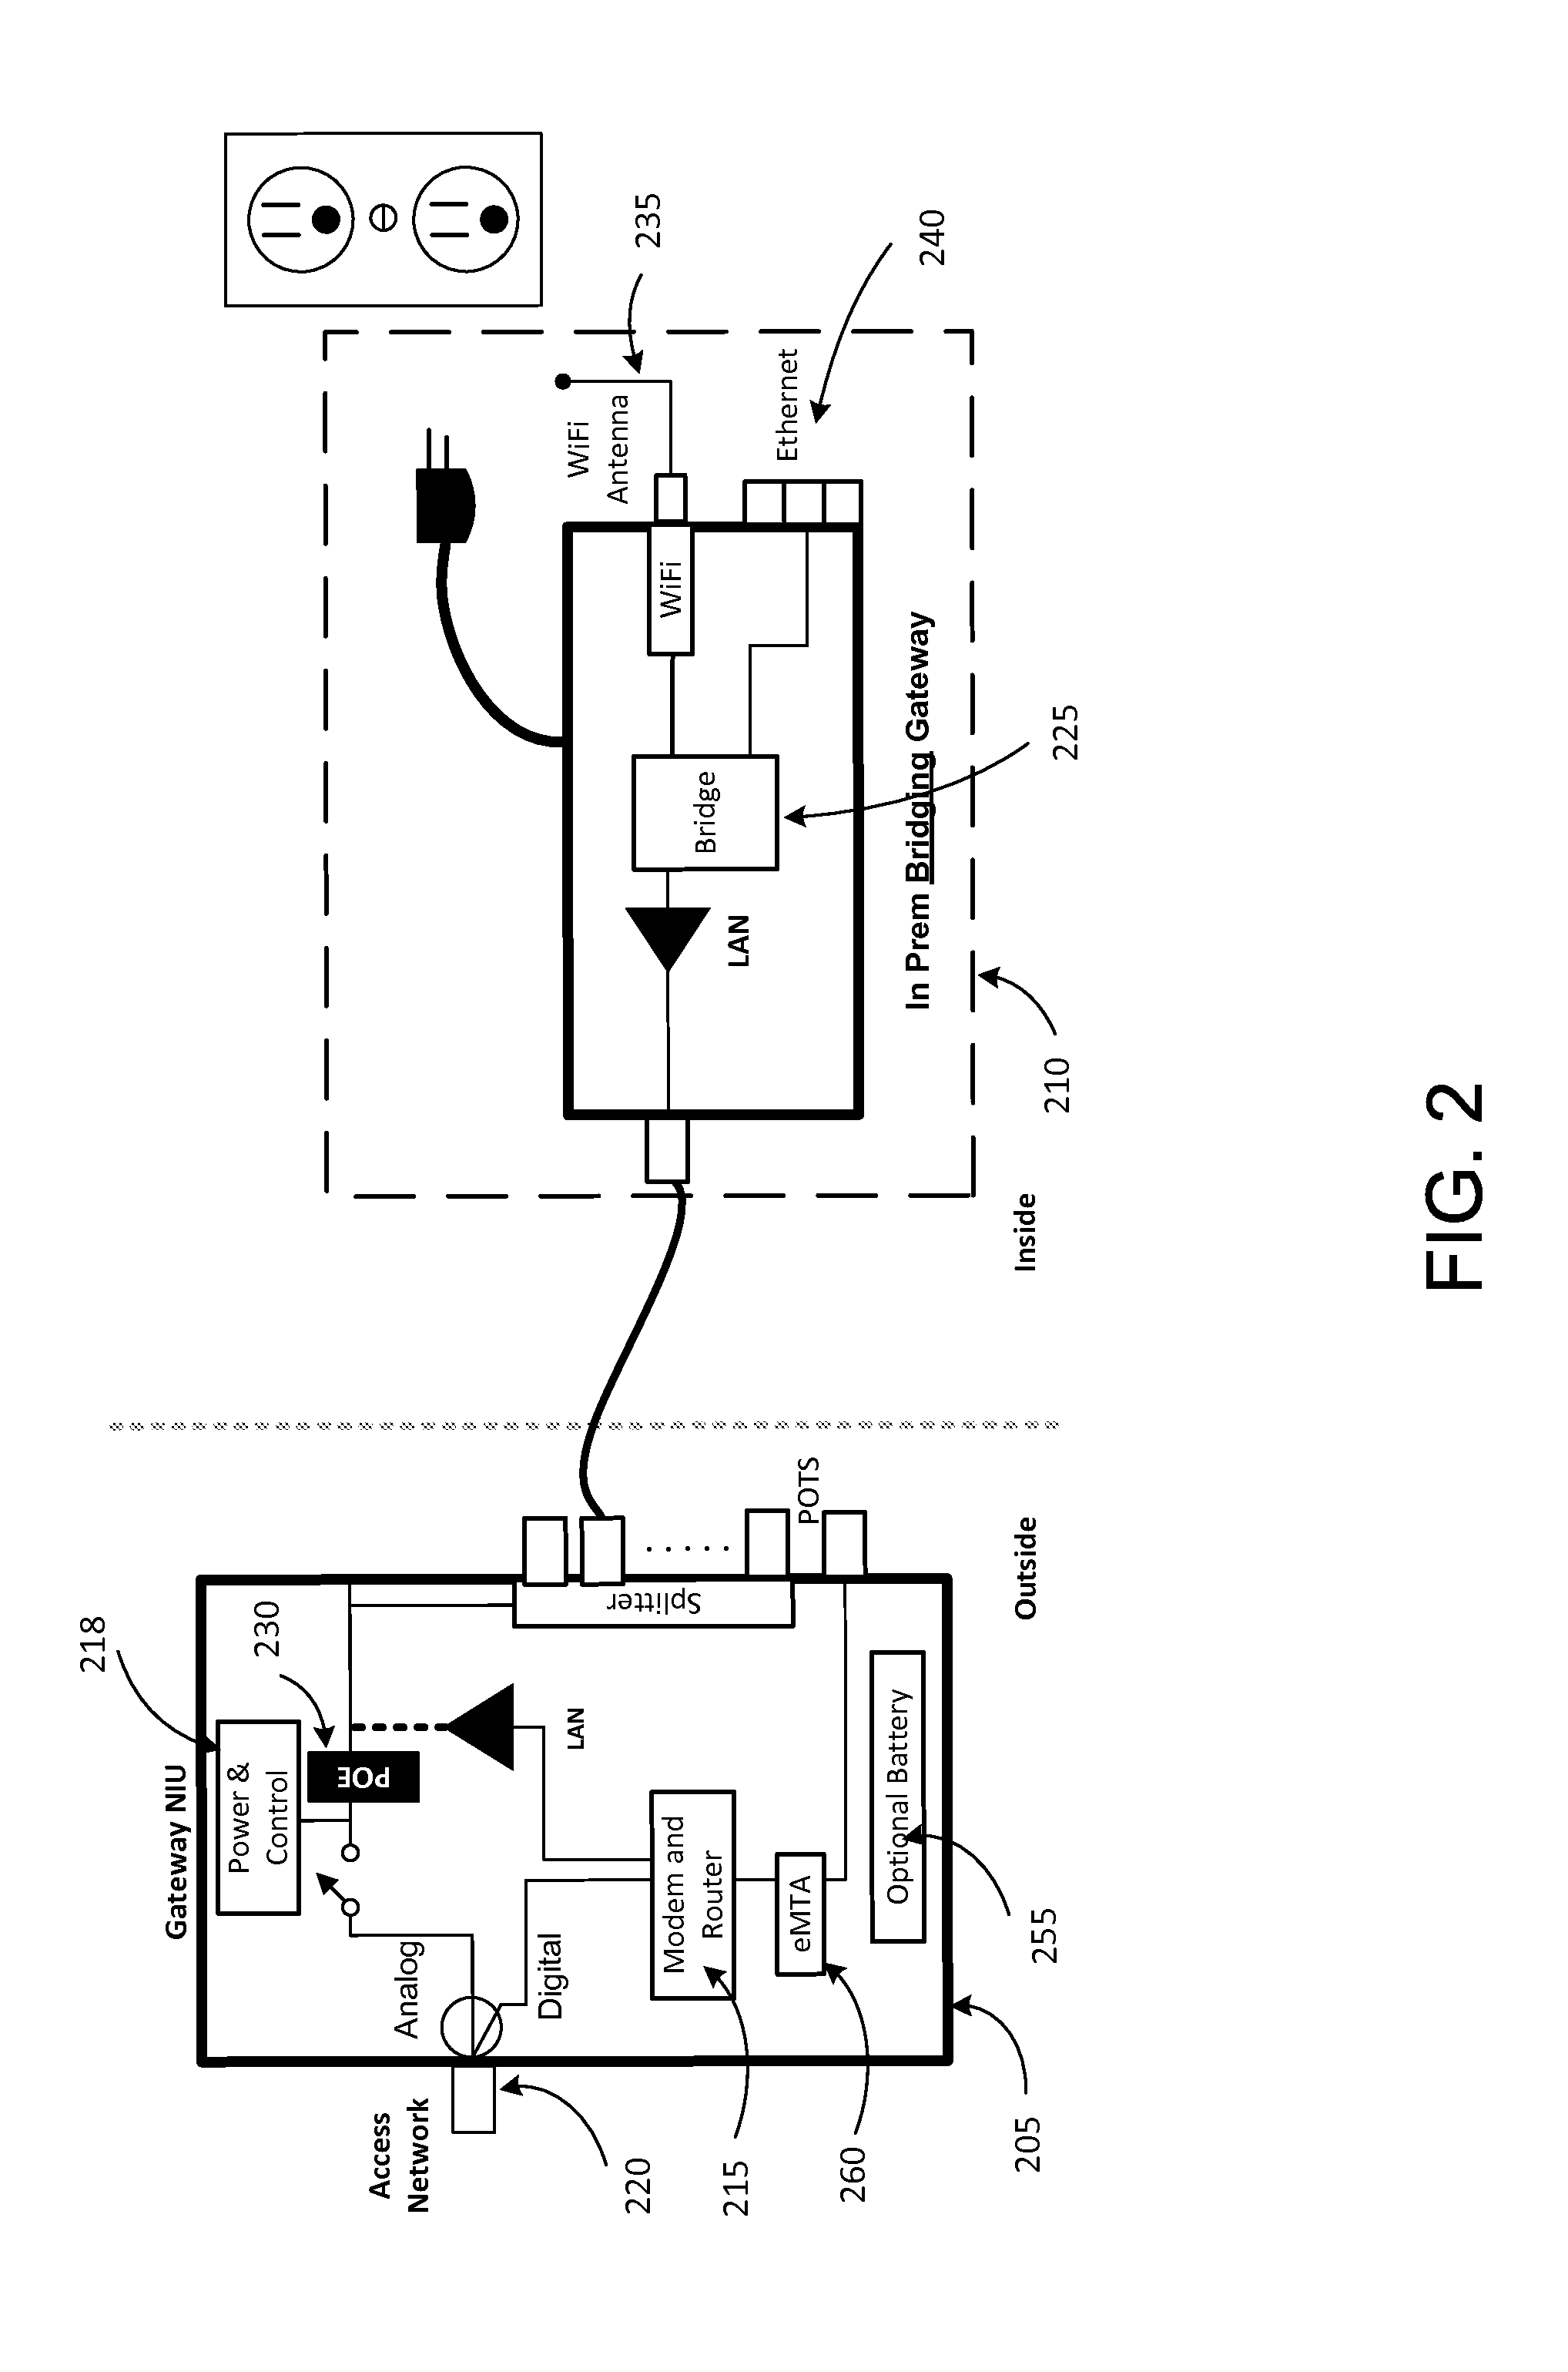 Systems and methods for providing broadband communication